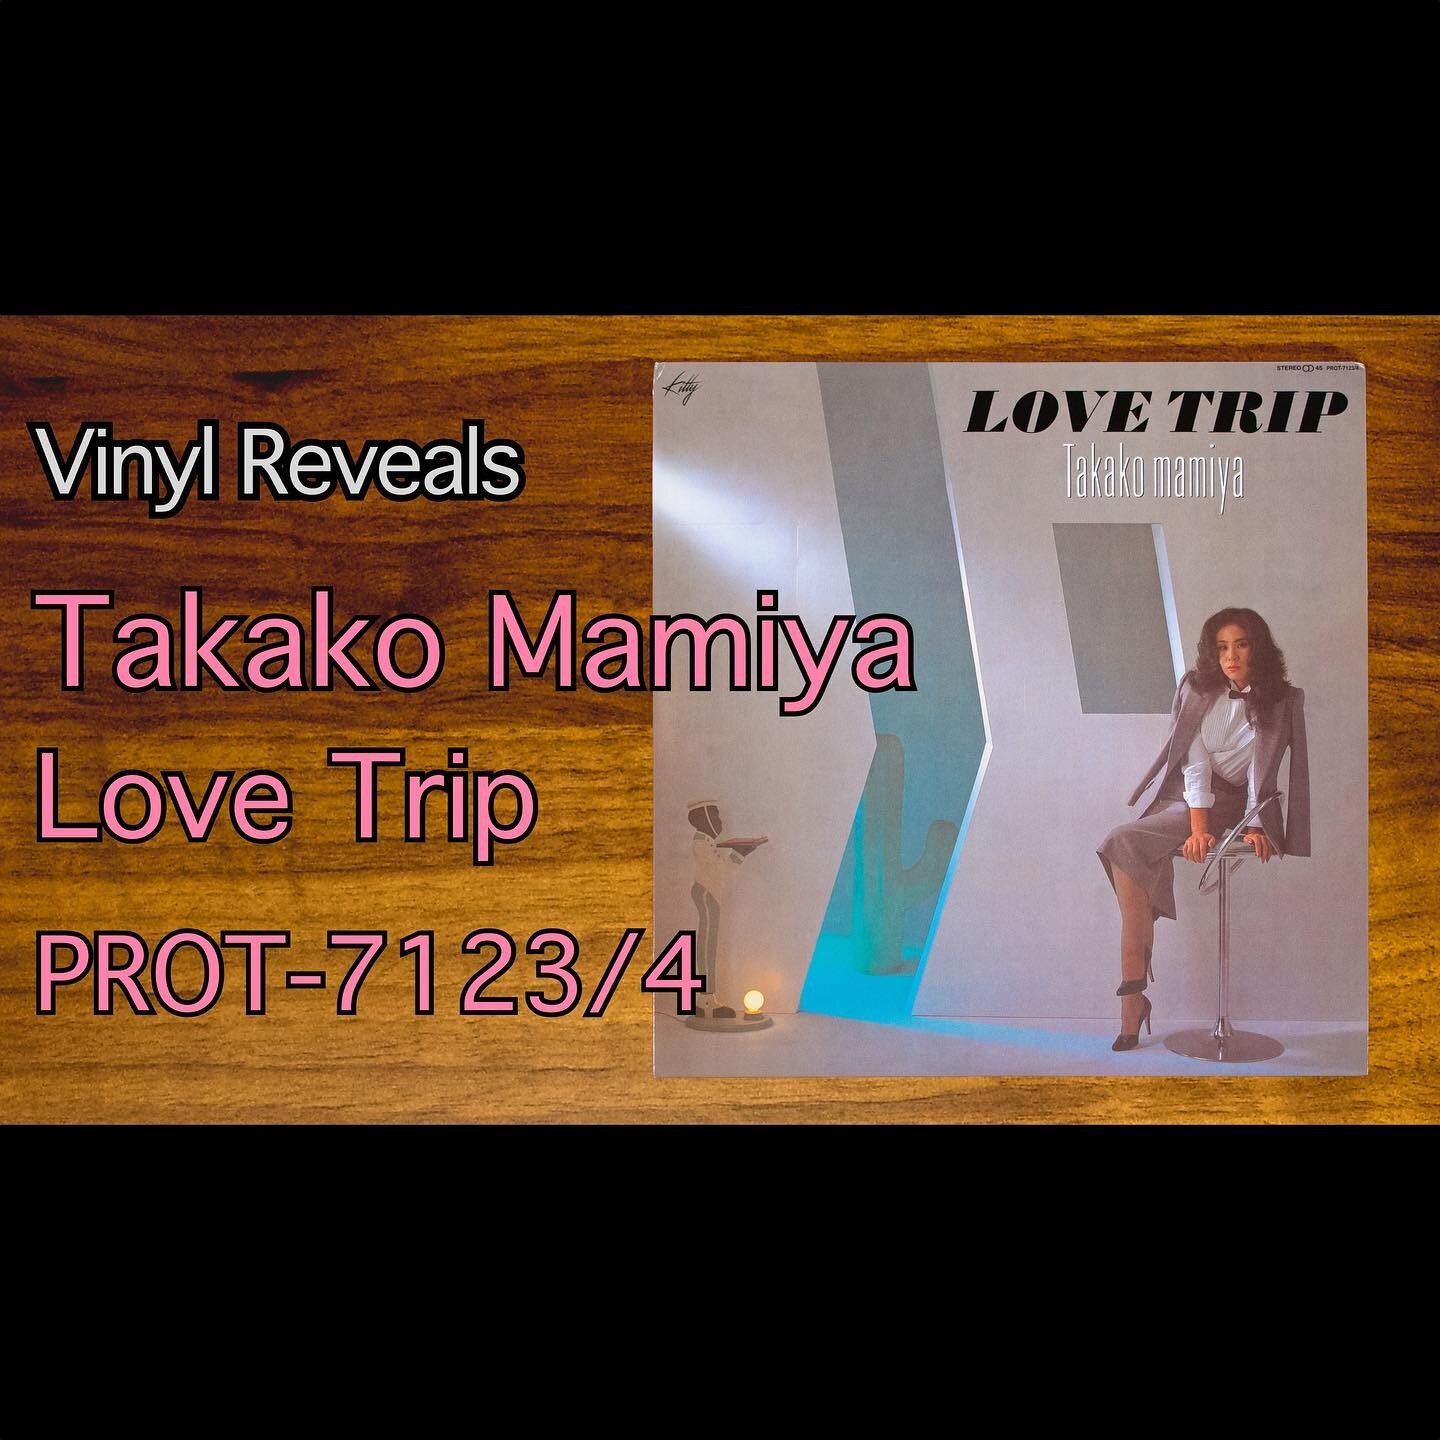 Today we are looking at Love Trip by Takako Mamiya. Video is now live on the Vinyl Reveals YouTube channel. Link in profile.

#vinylReveal #vinyl #vinylcollection #vinylrecords #records #vinylReveals #vinylcommunity #citypop #japanese